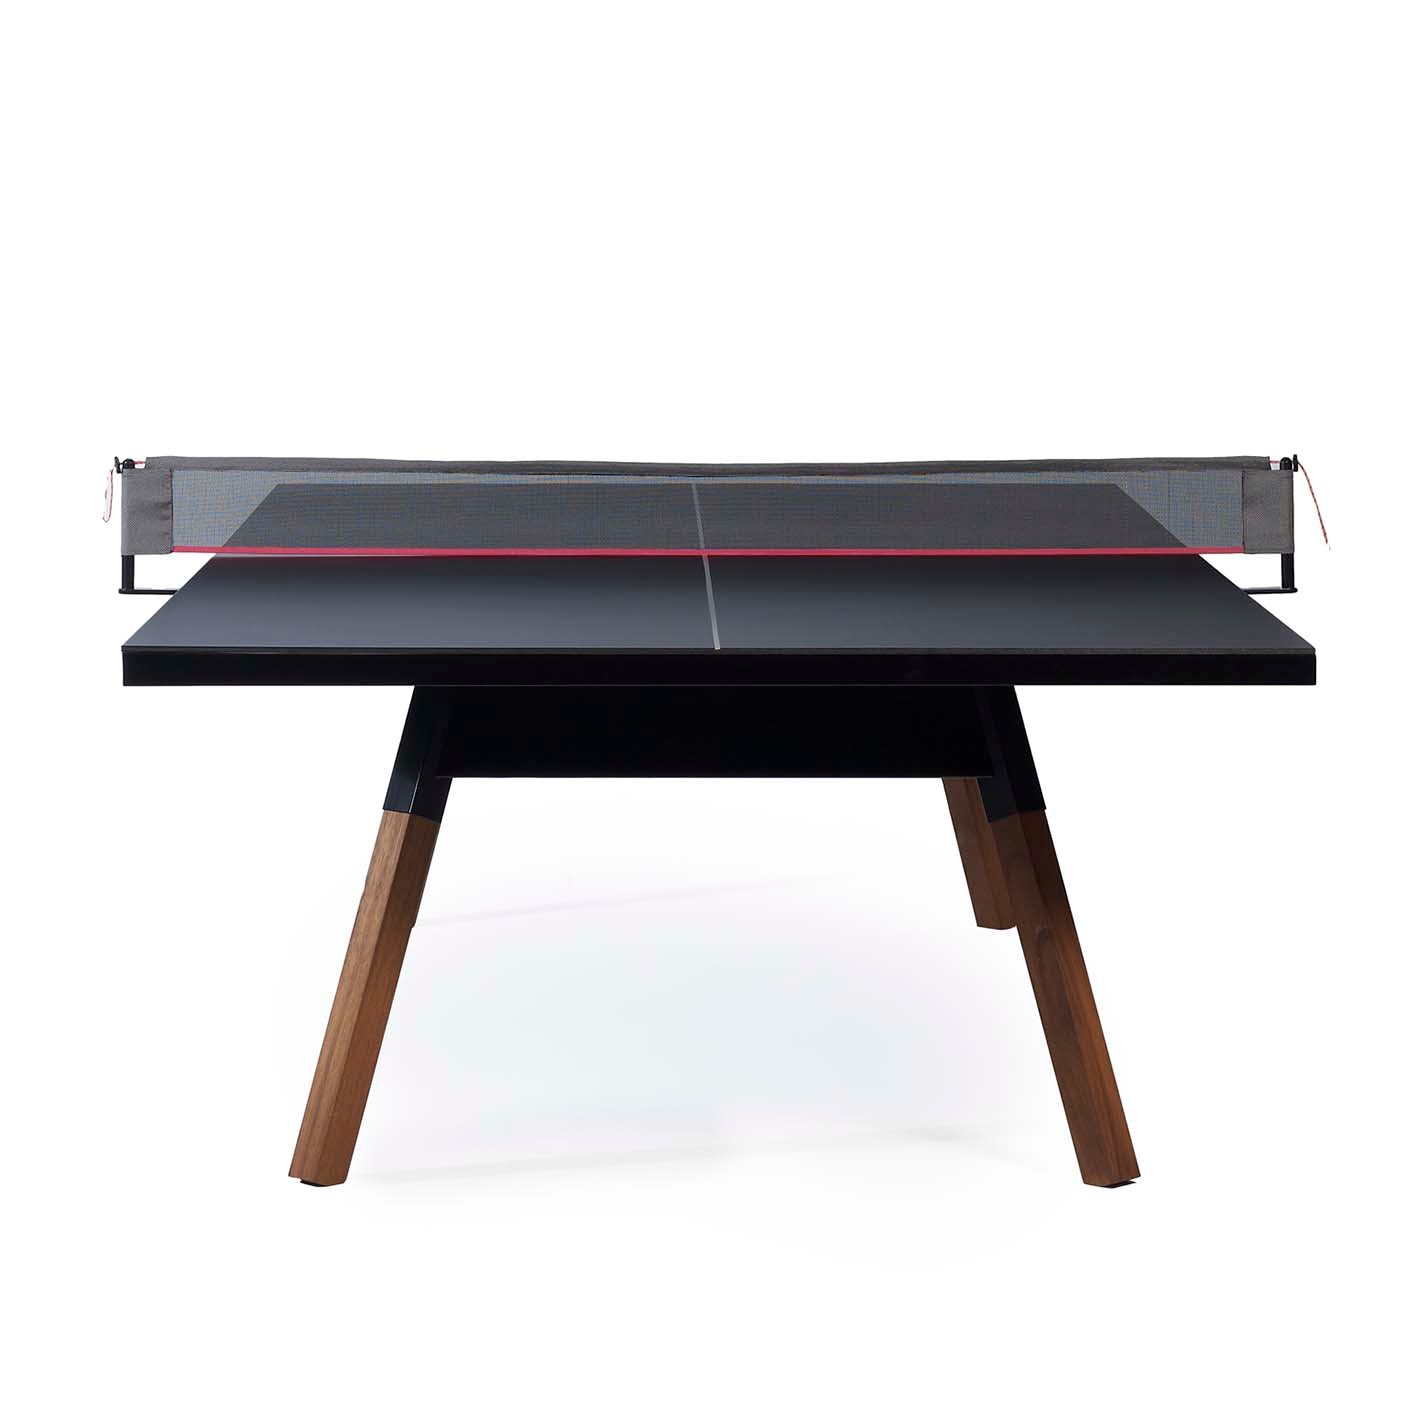 You & Me Table tennis table 220